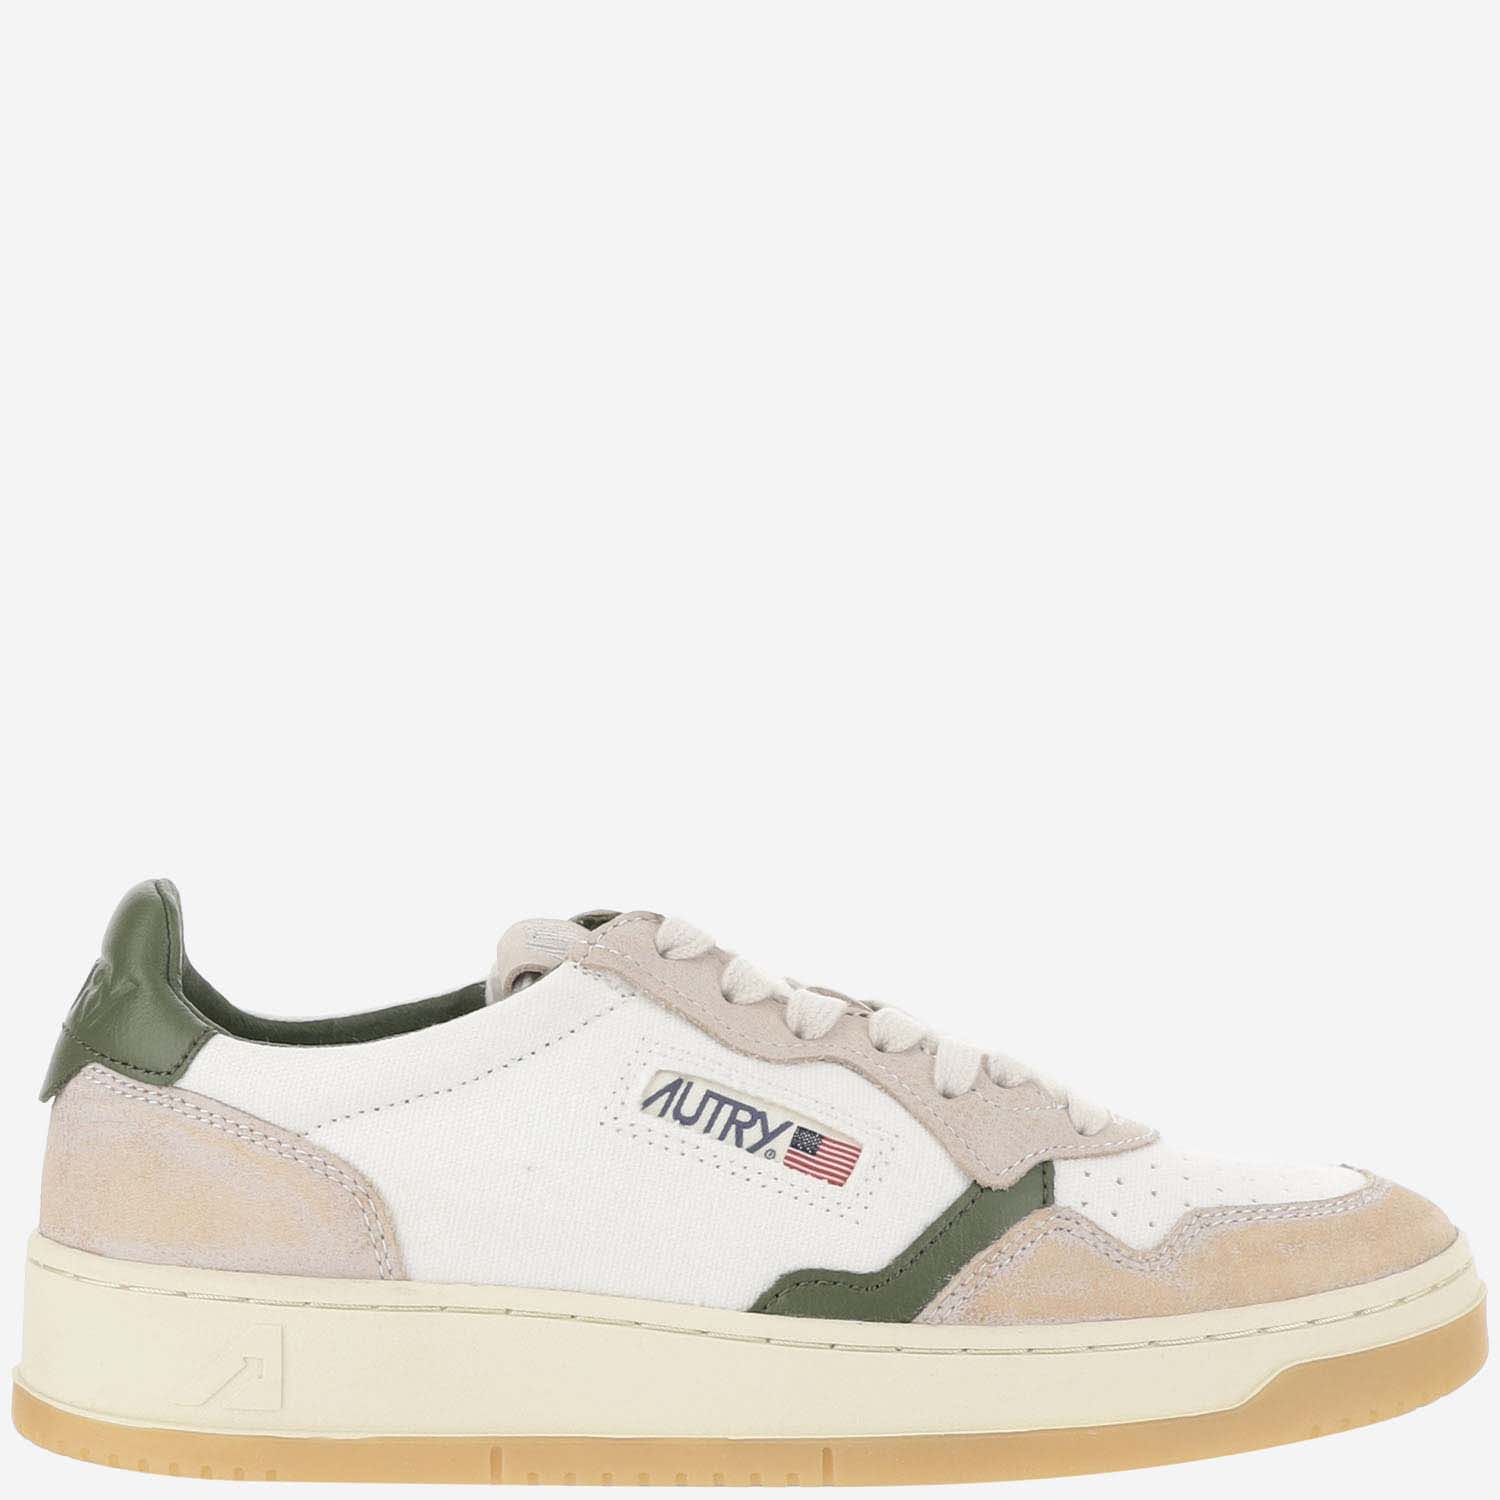 Autry Medalist Low Canvas Sneakers In Wht/cyprs